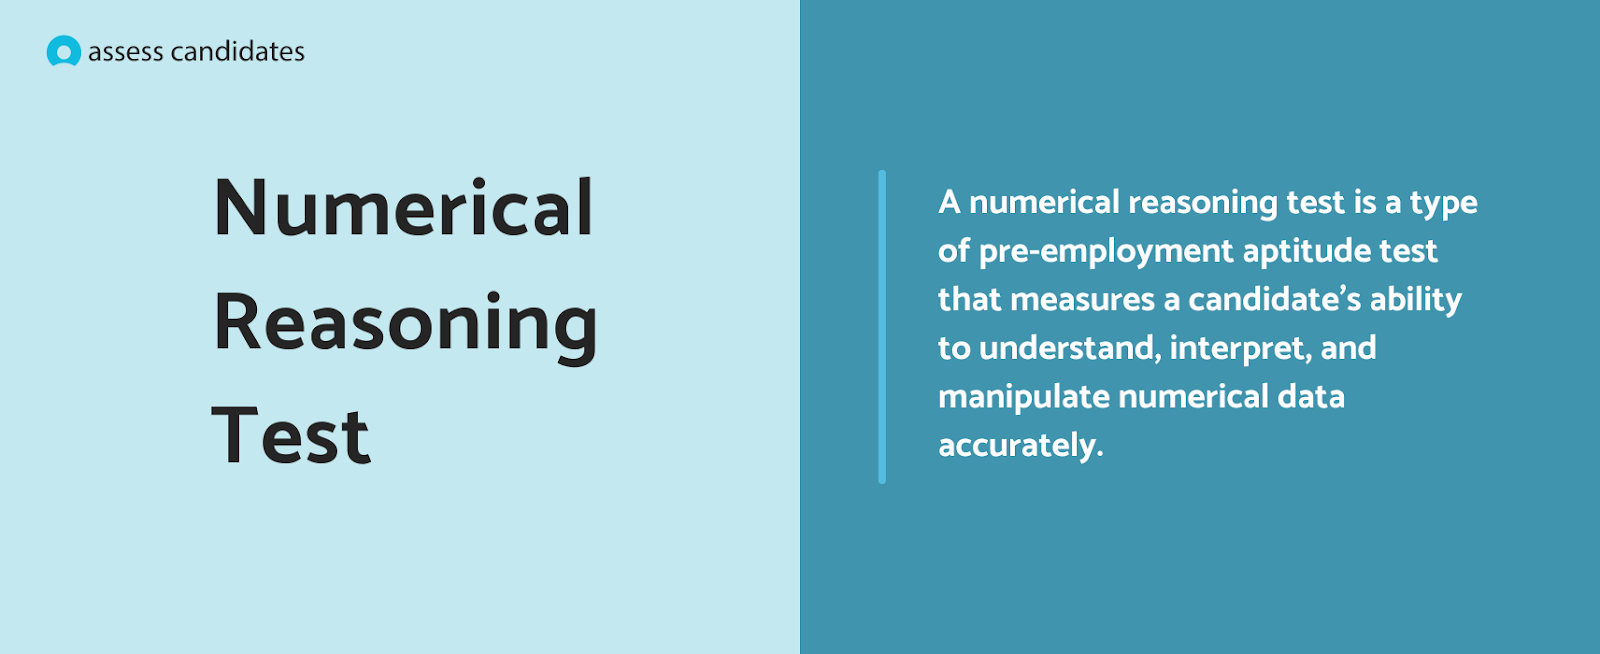 What is a Numerical Reasoning Test?